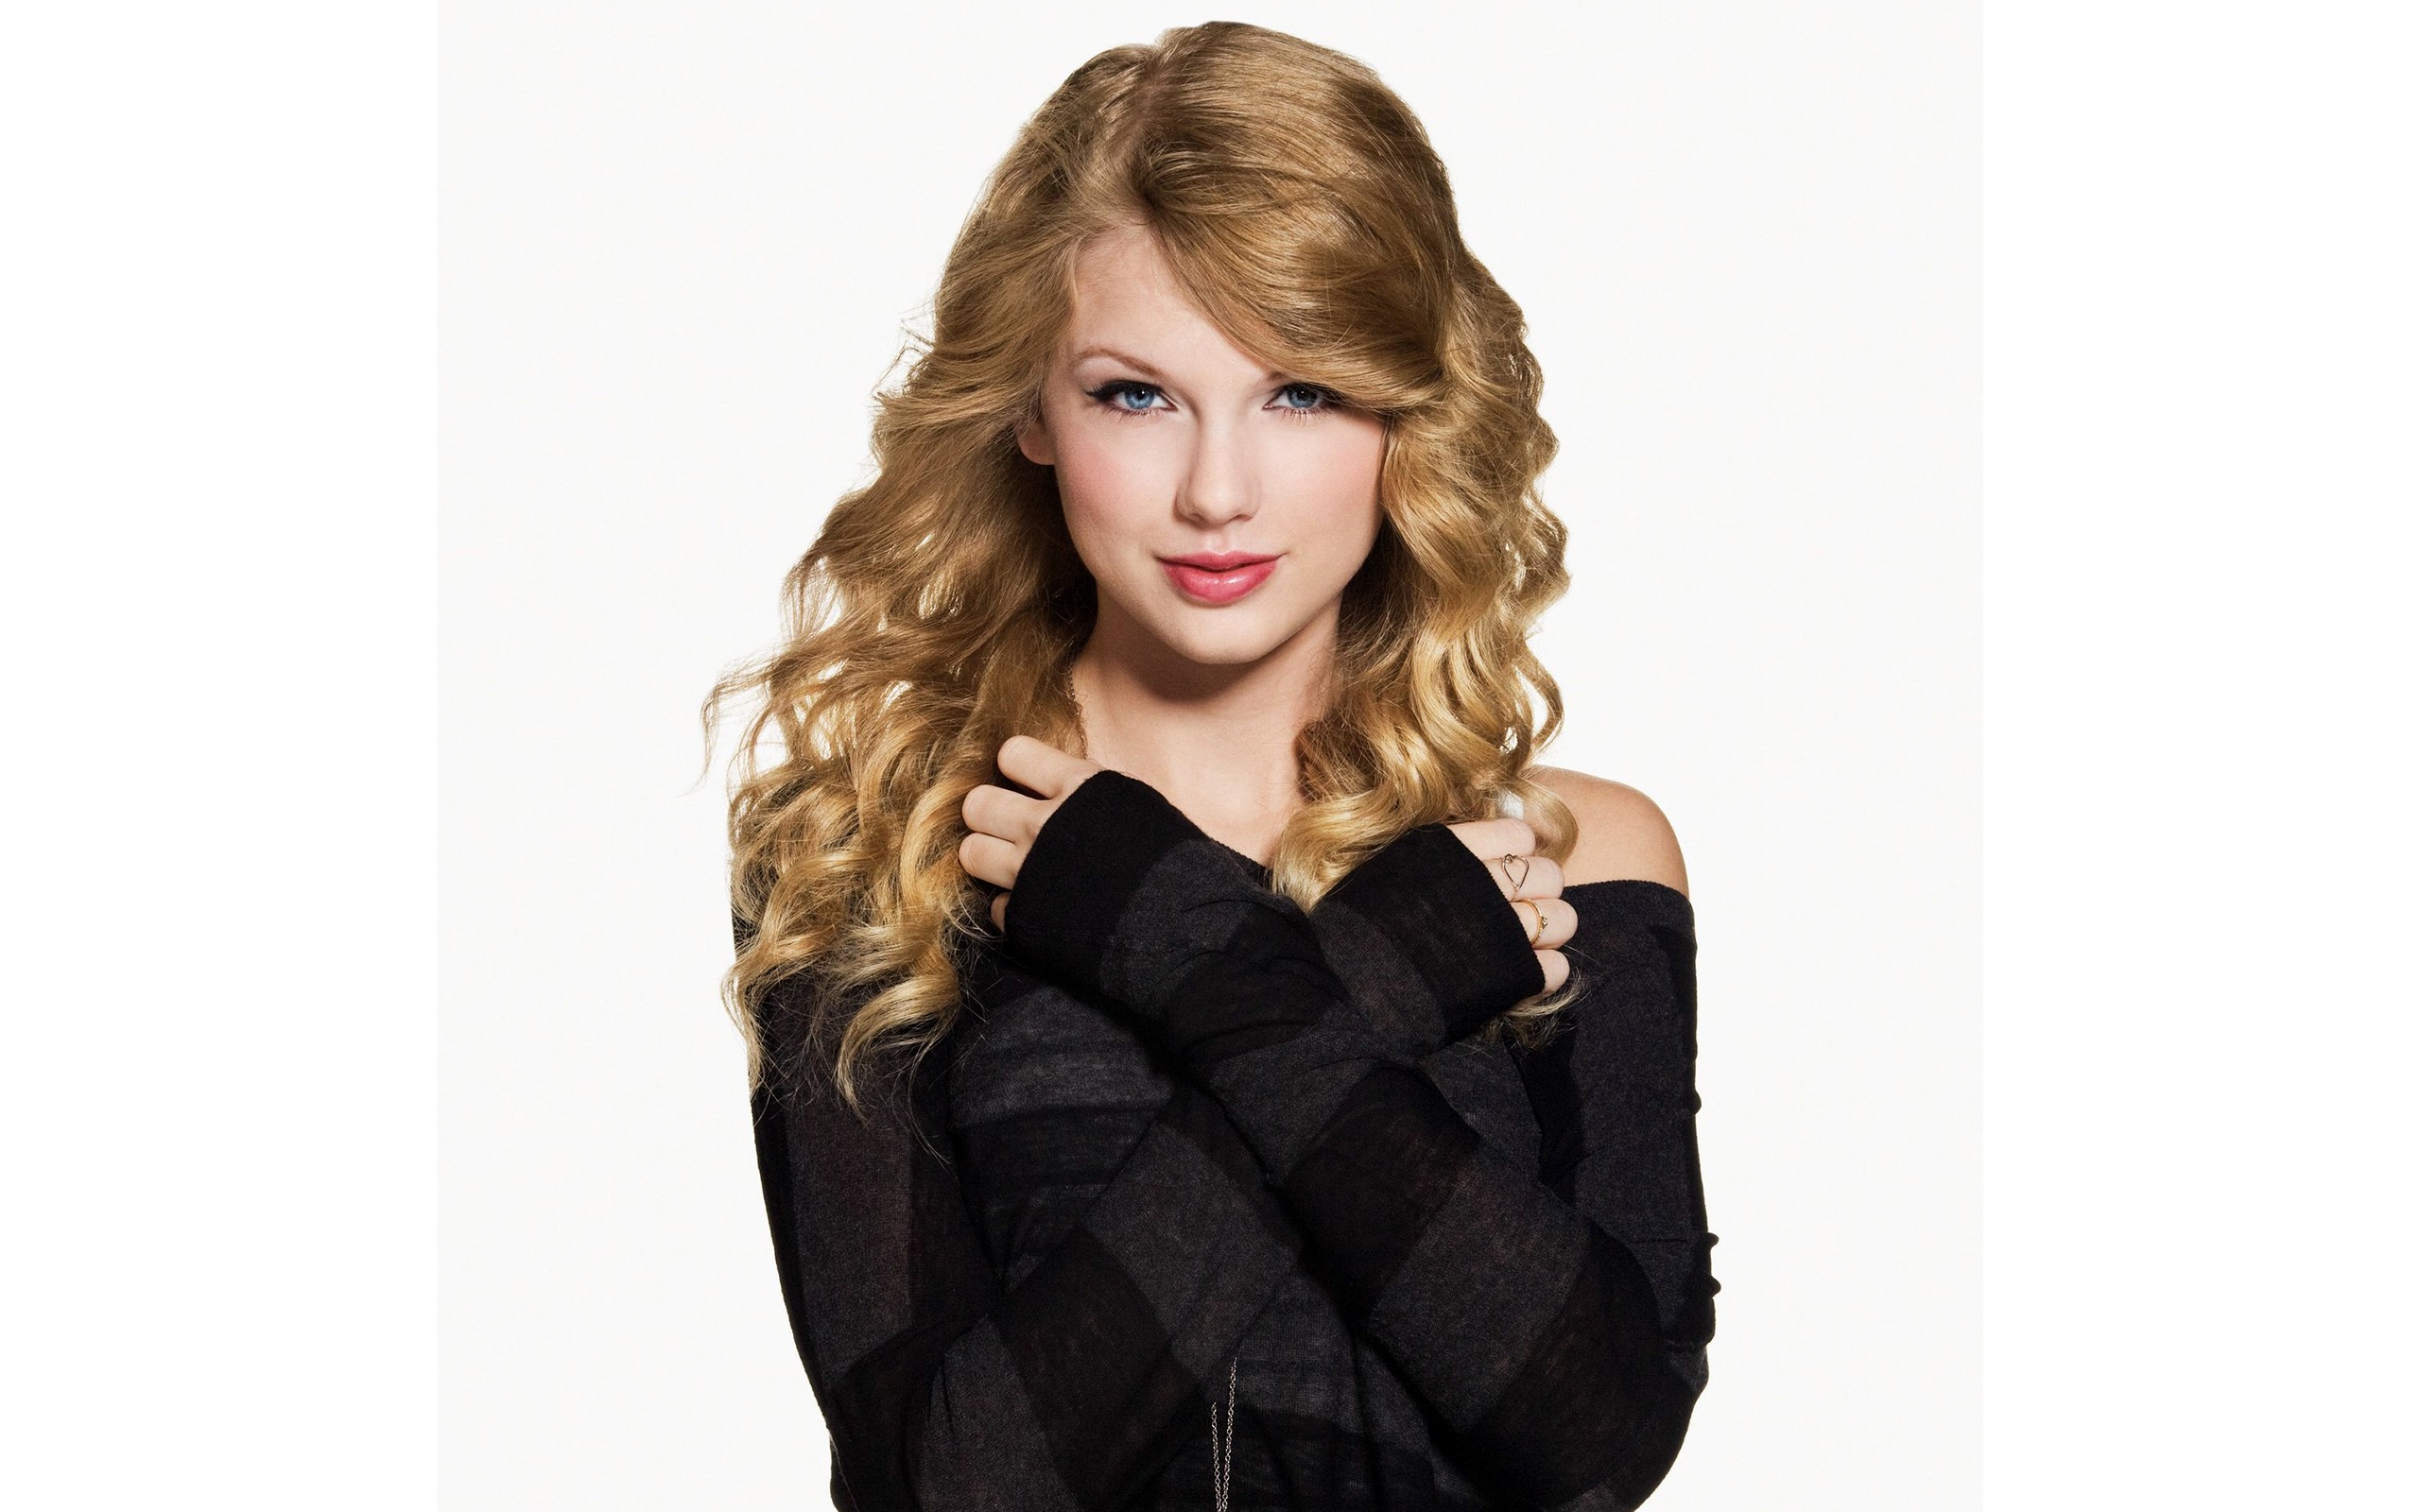 People 2560x1600 Taylor Swift singer celebrity women simple background arms crossed makeup white background blonde studio